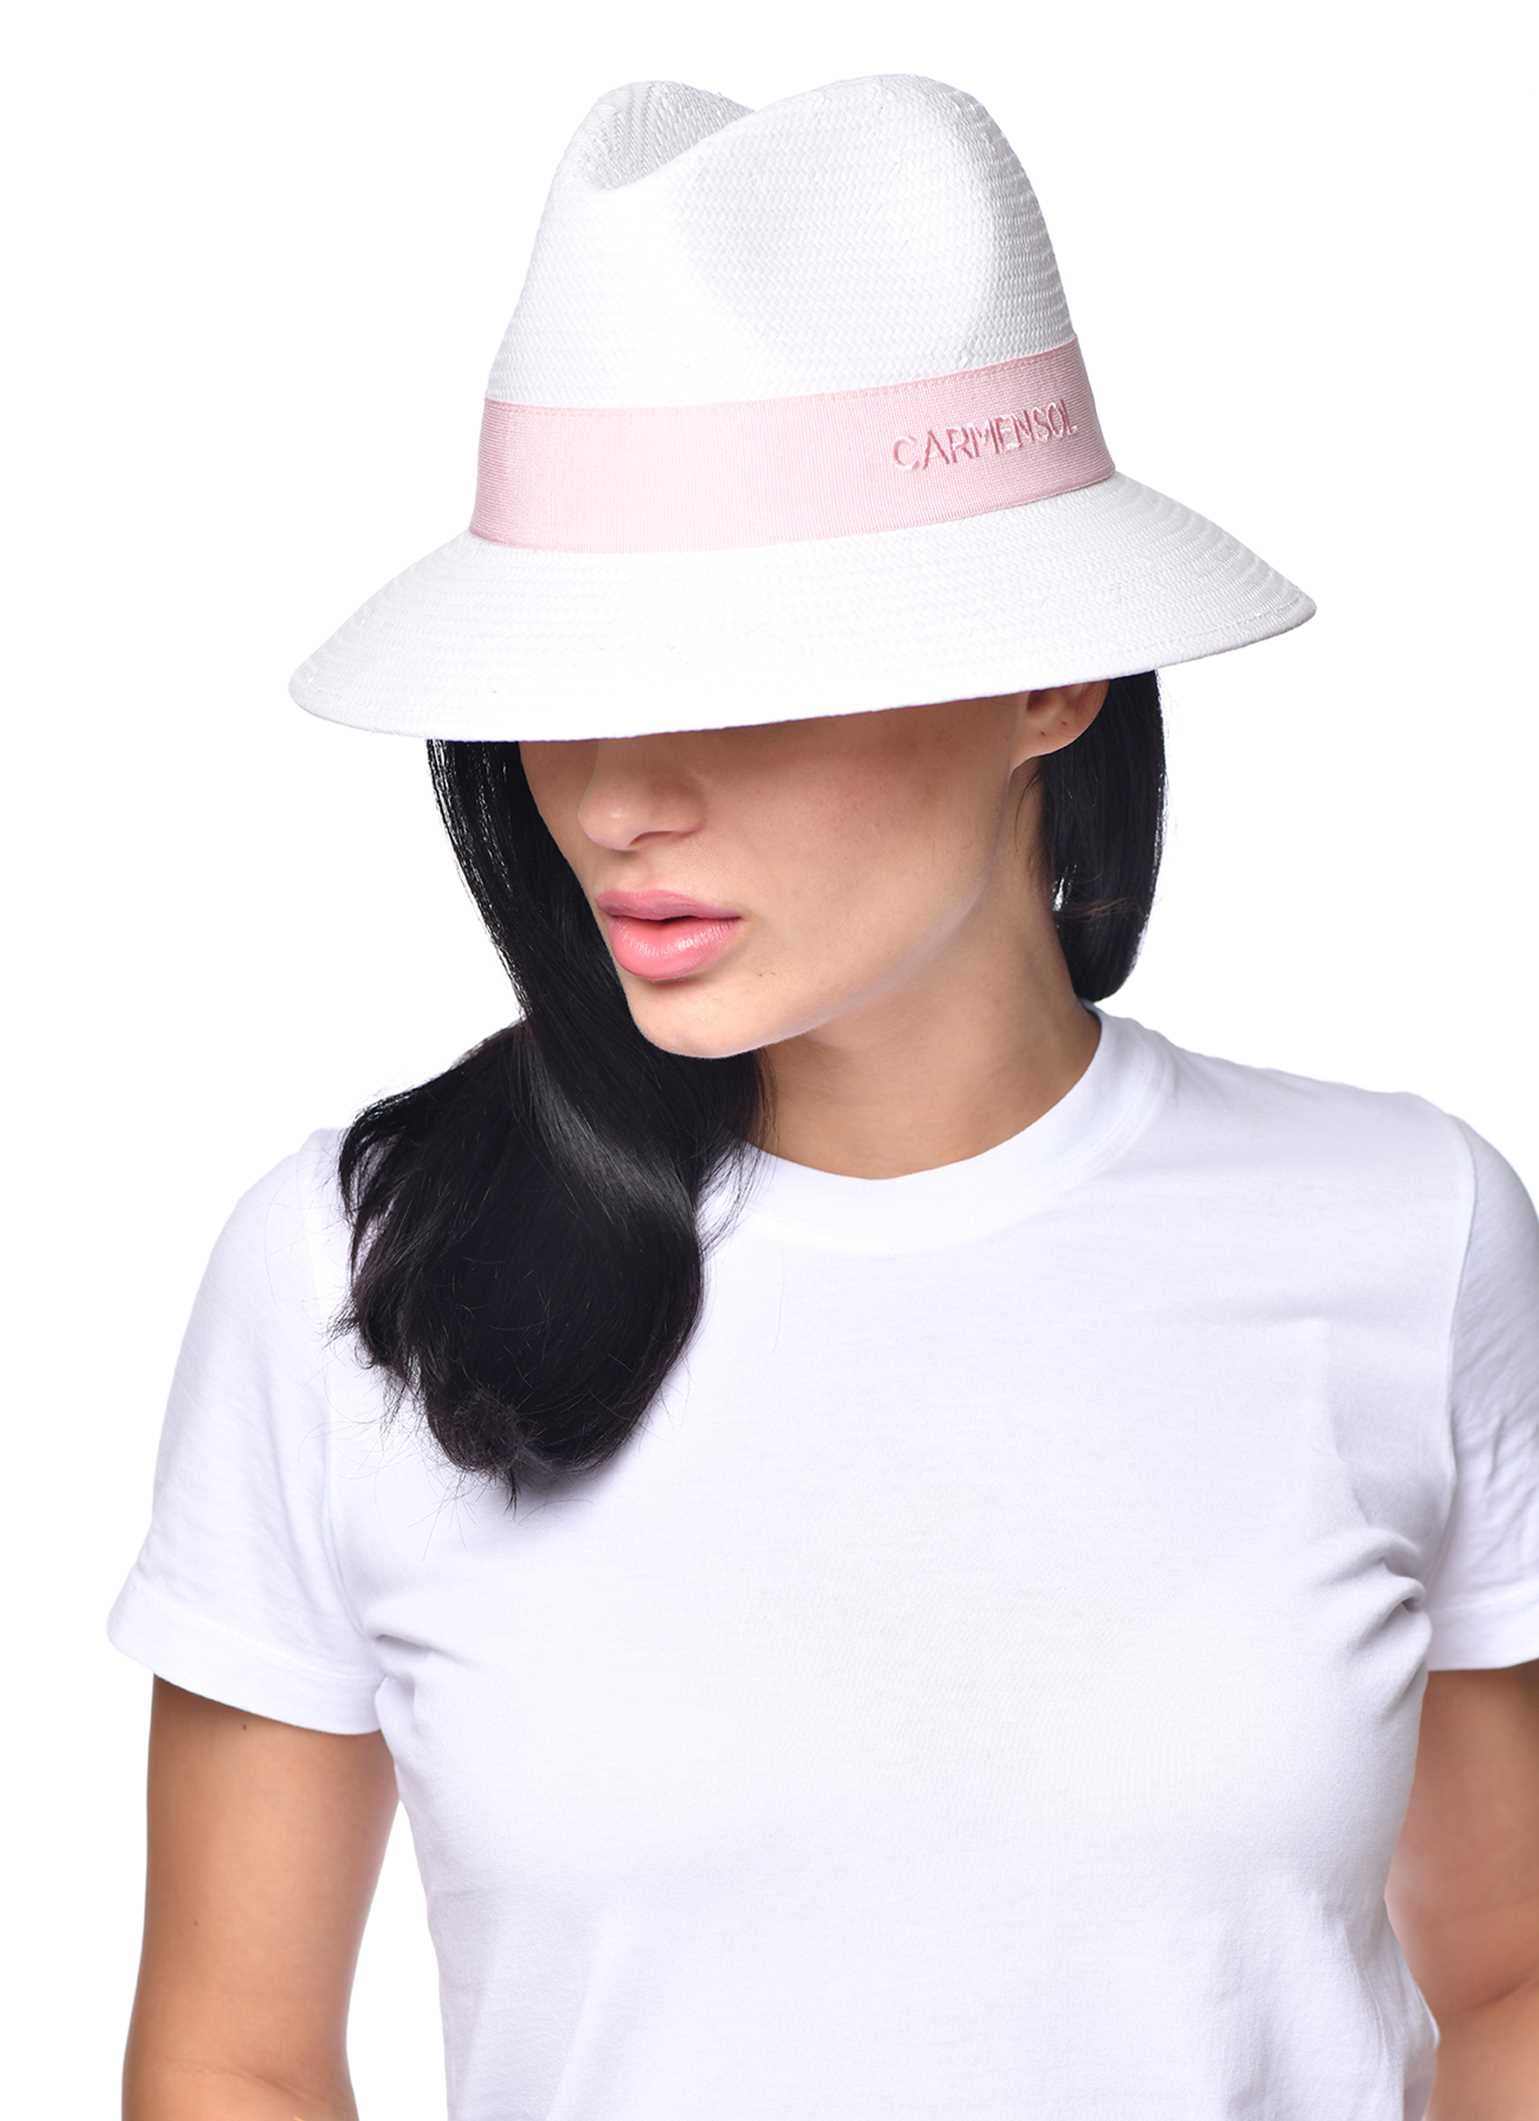 Women wearing Dolores 2 packable fedora hat in color baby pink